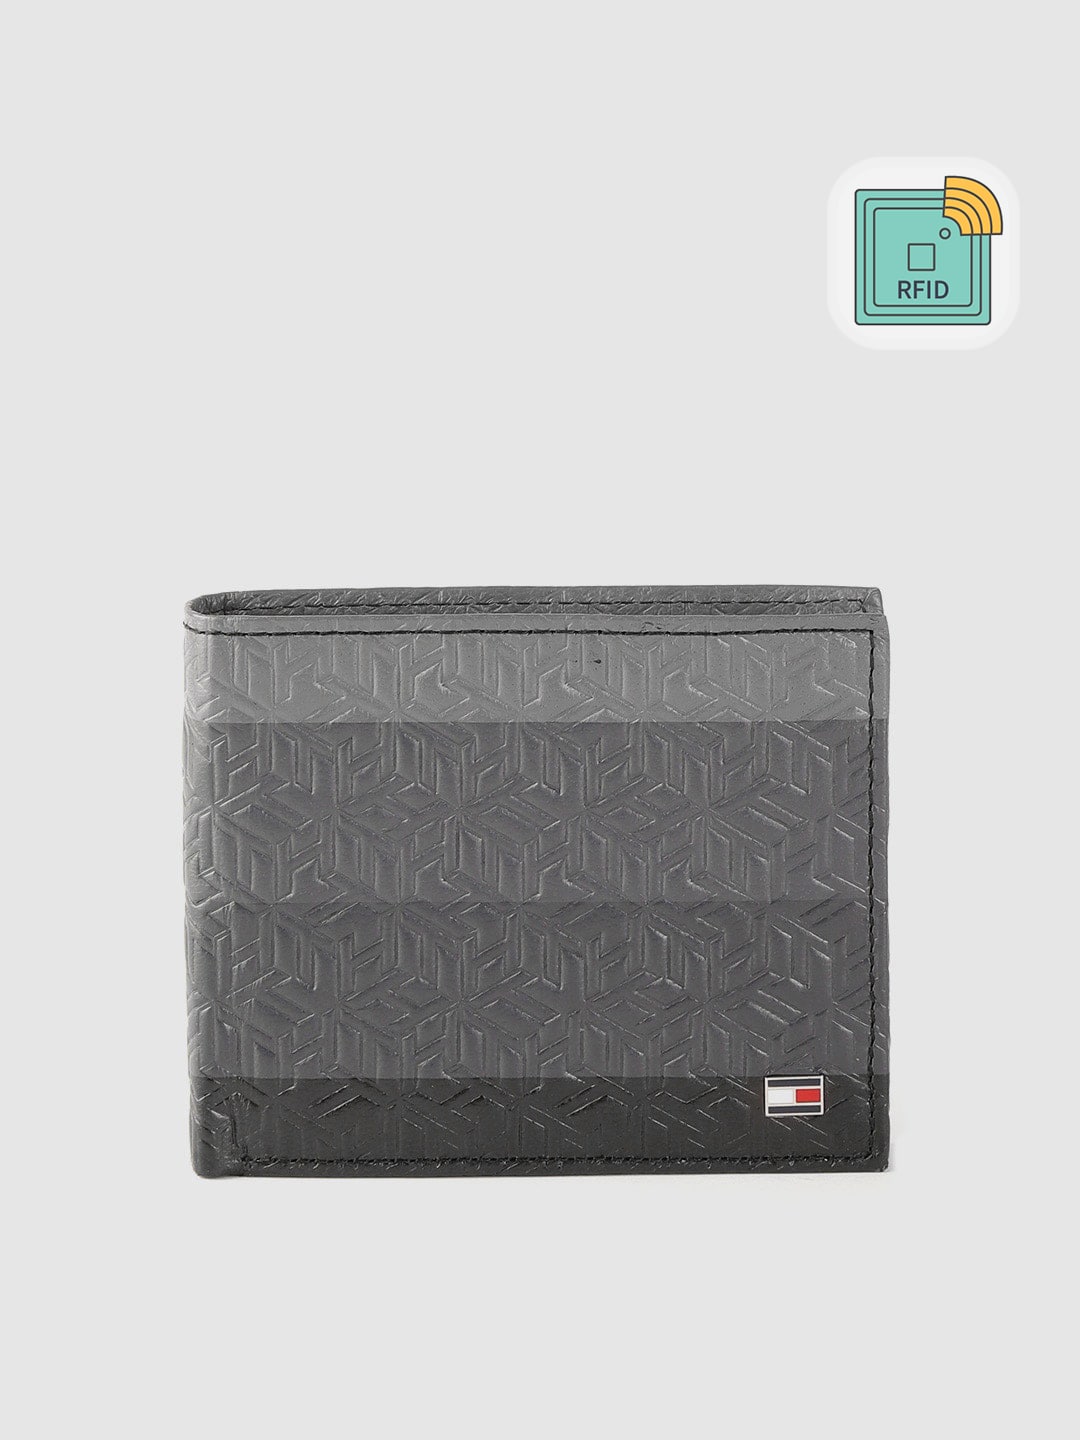 Tommy Hilfiger Men Grey & Black Brand Logo Textured Leather Two Fold Wallet with RFID